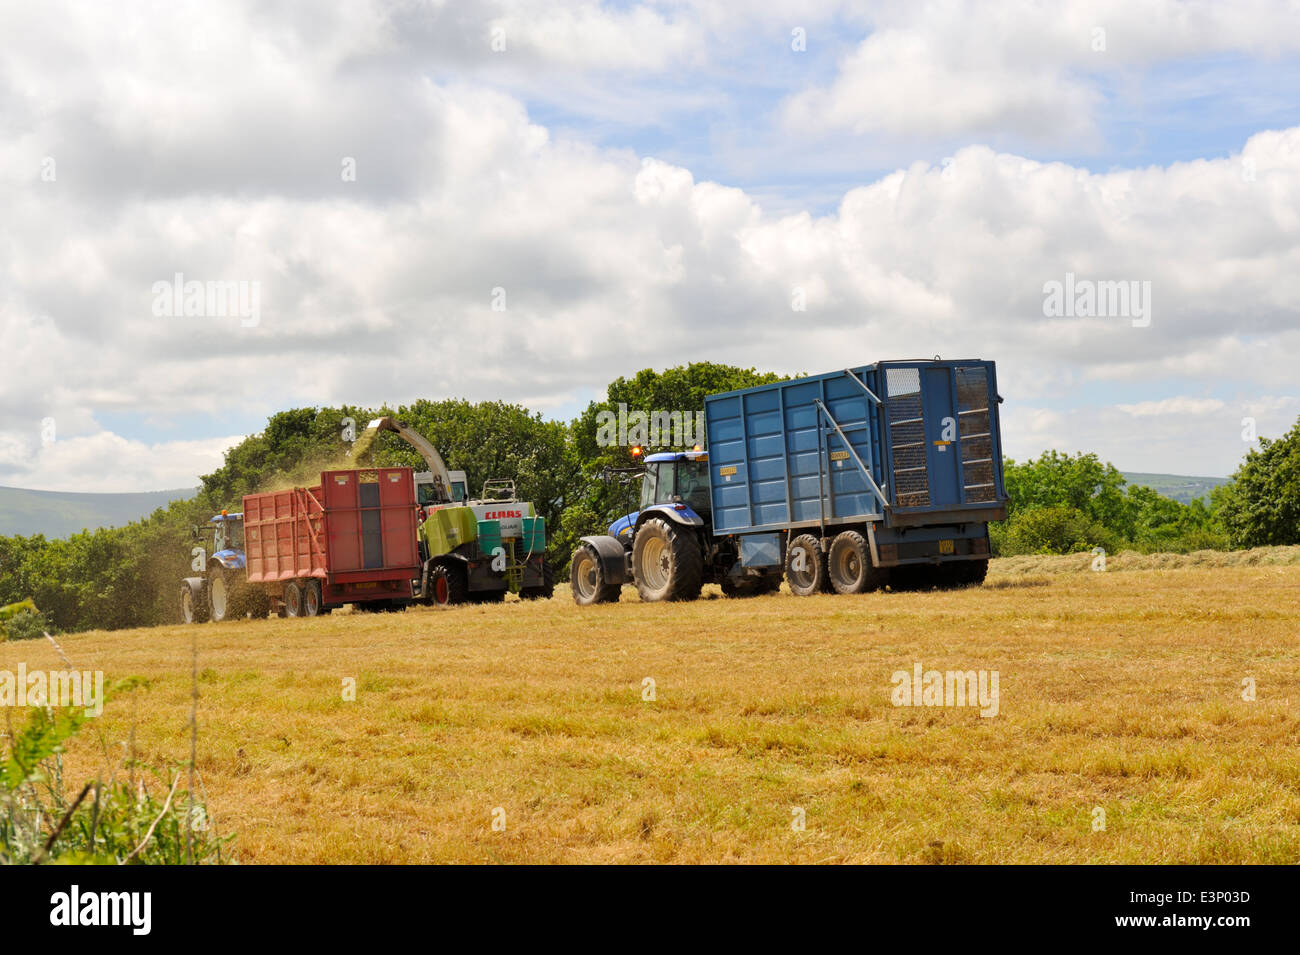 Tractor pulled trailers being filled by cut grass for silage making by forage harvester Stock Photo